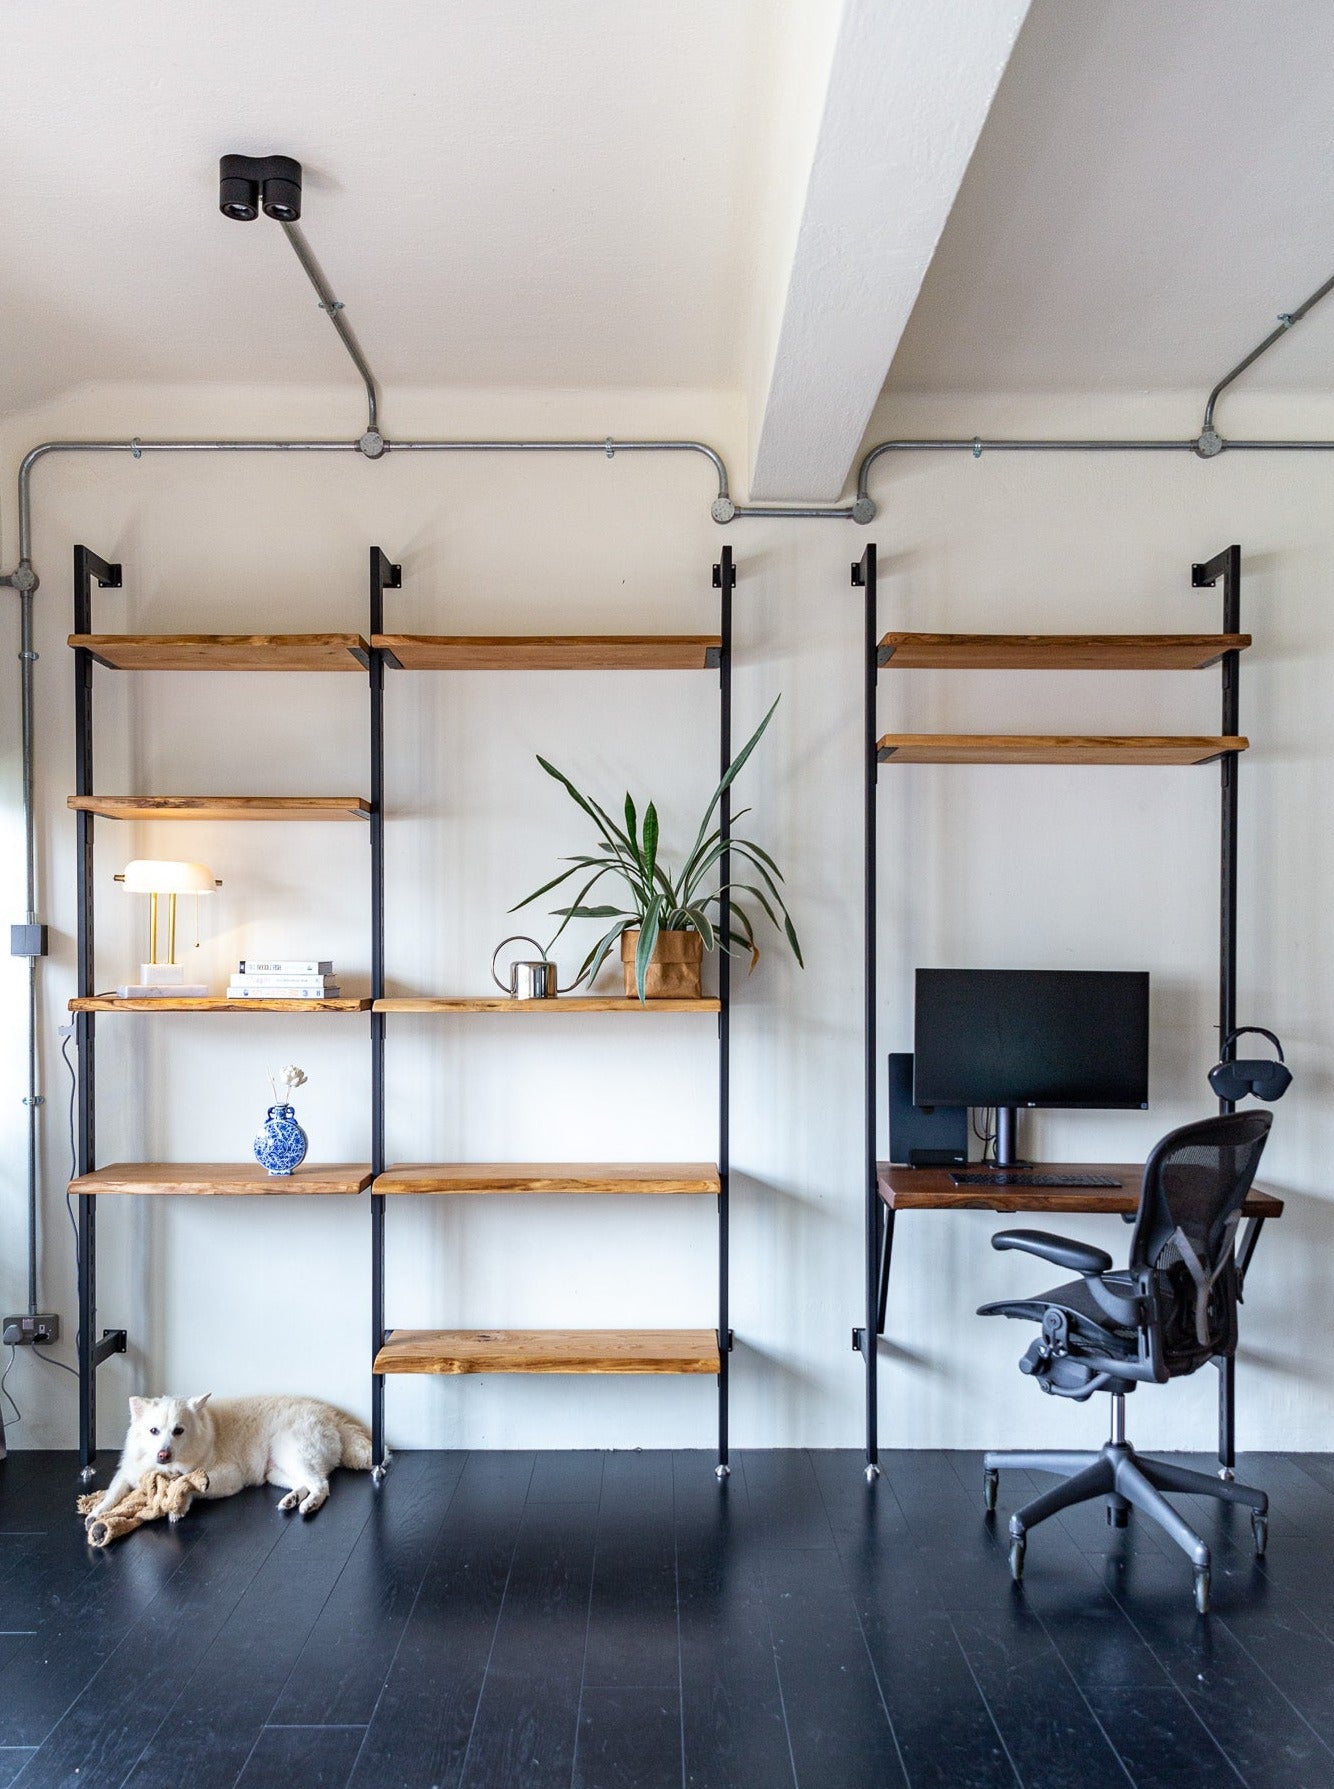 The Adjustable Atlas Shelf System by The Table Guy